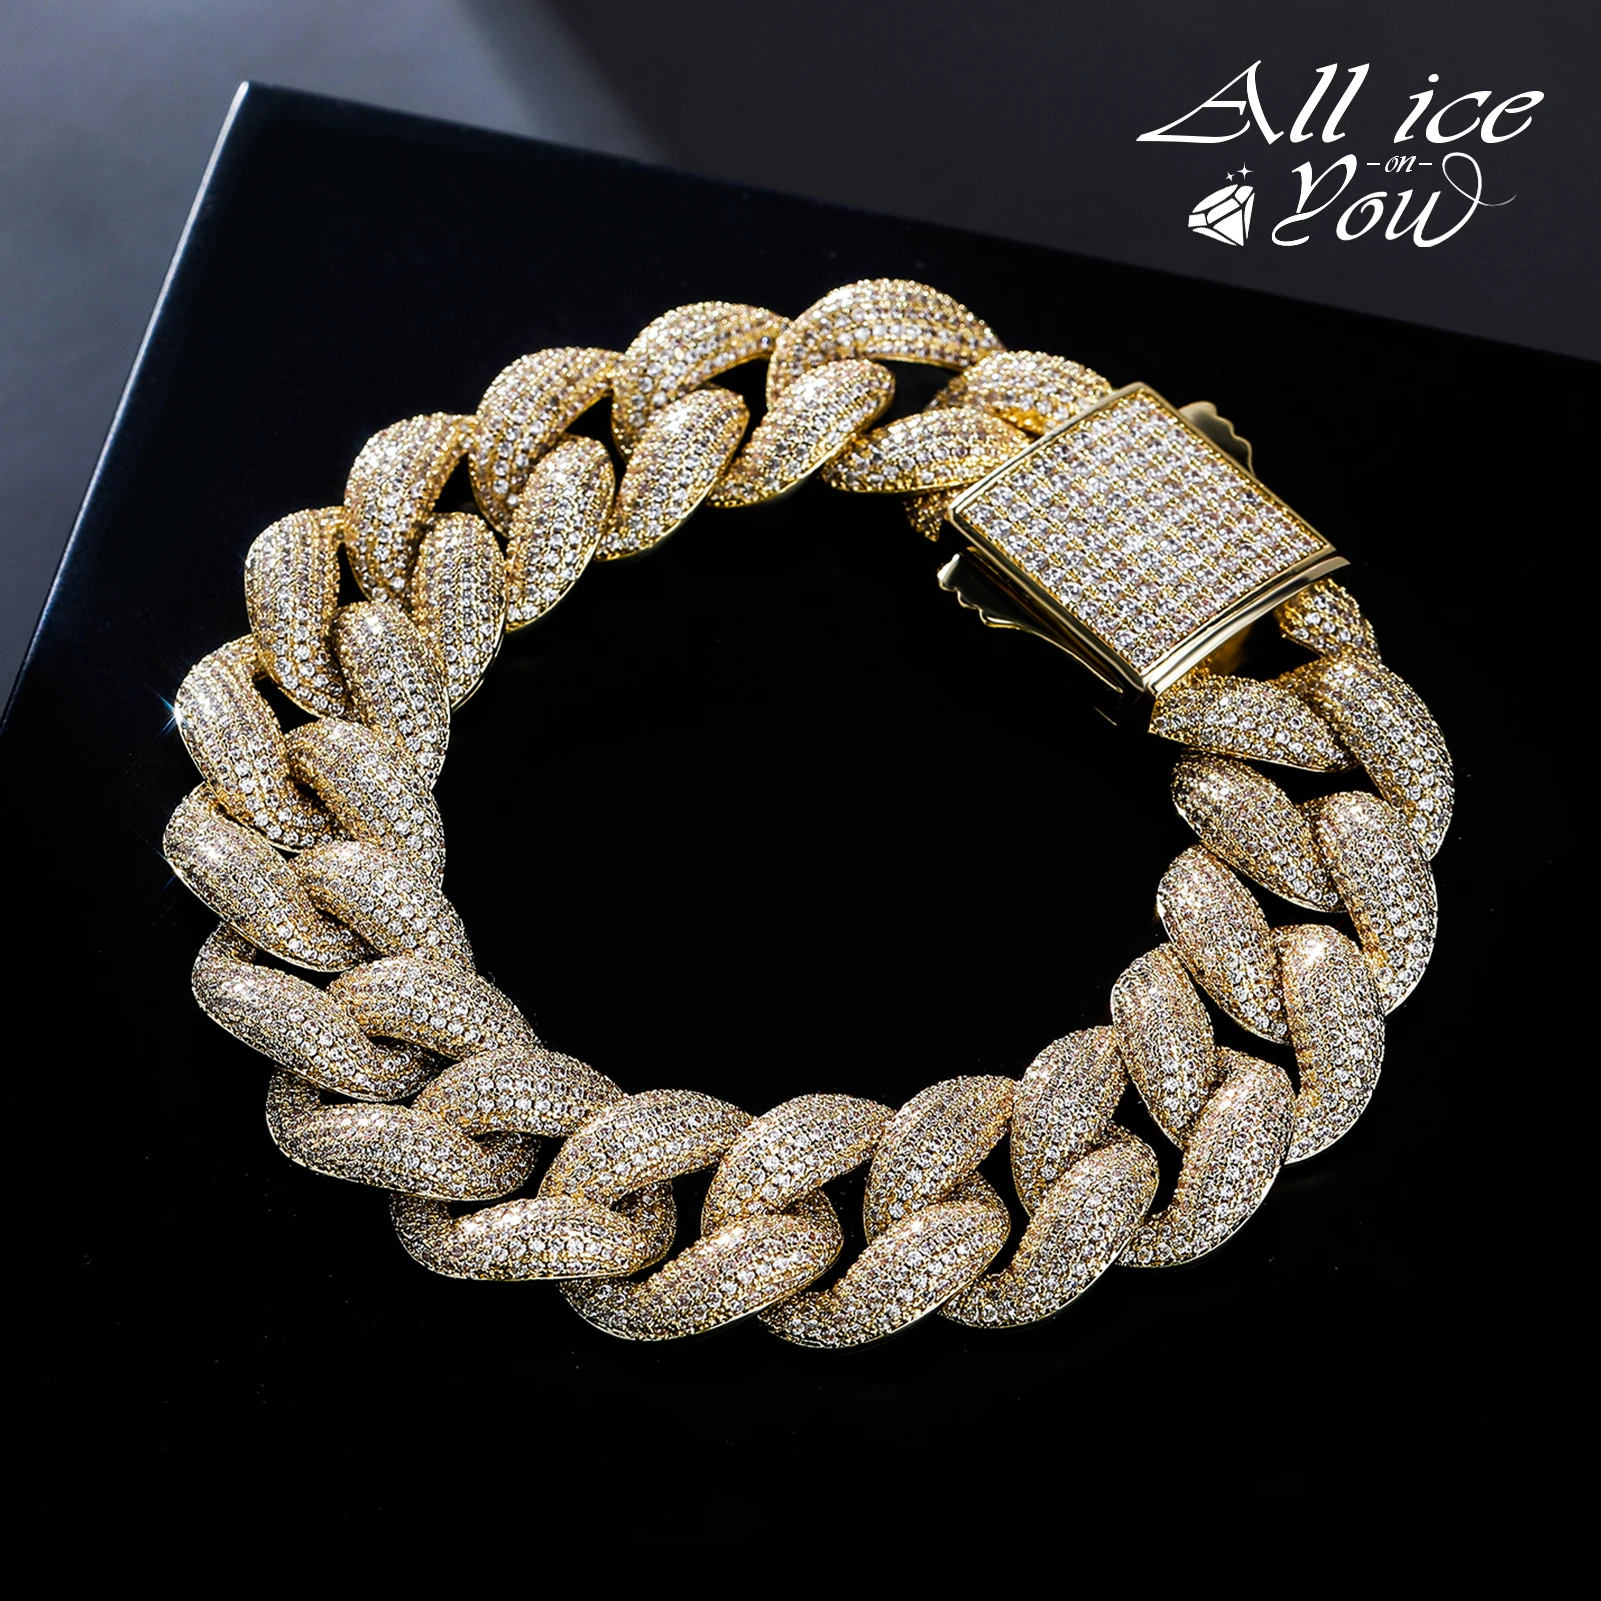 ALLICEONYOU 18MM High Qualtiy Iced Out Cubic Zirconia Bracelet Cuban Chain Hip Hop Jewelry For Men and Women Gift